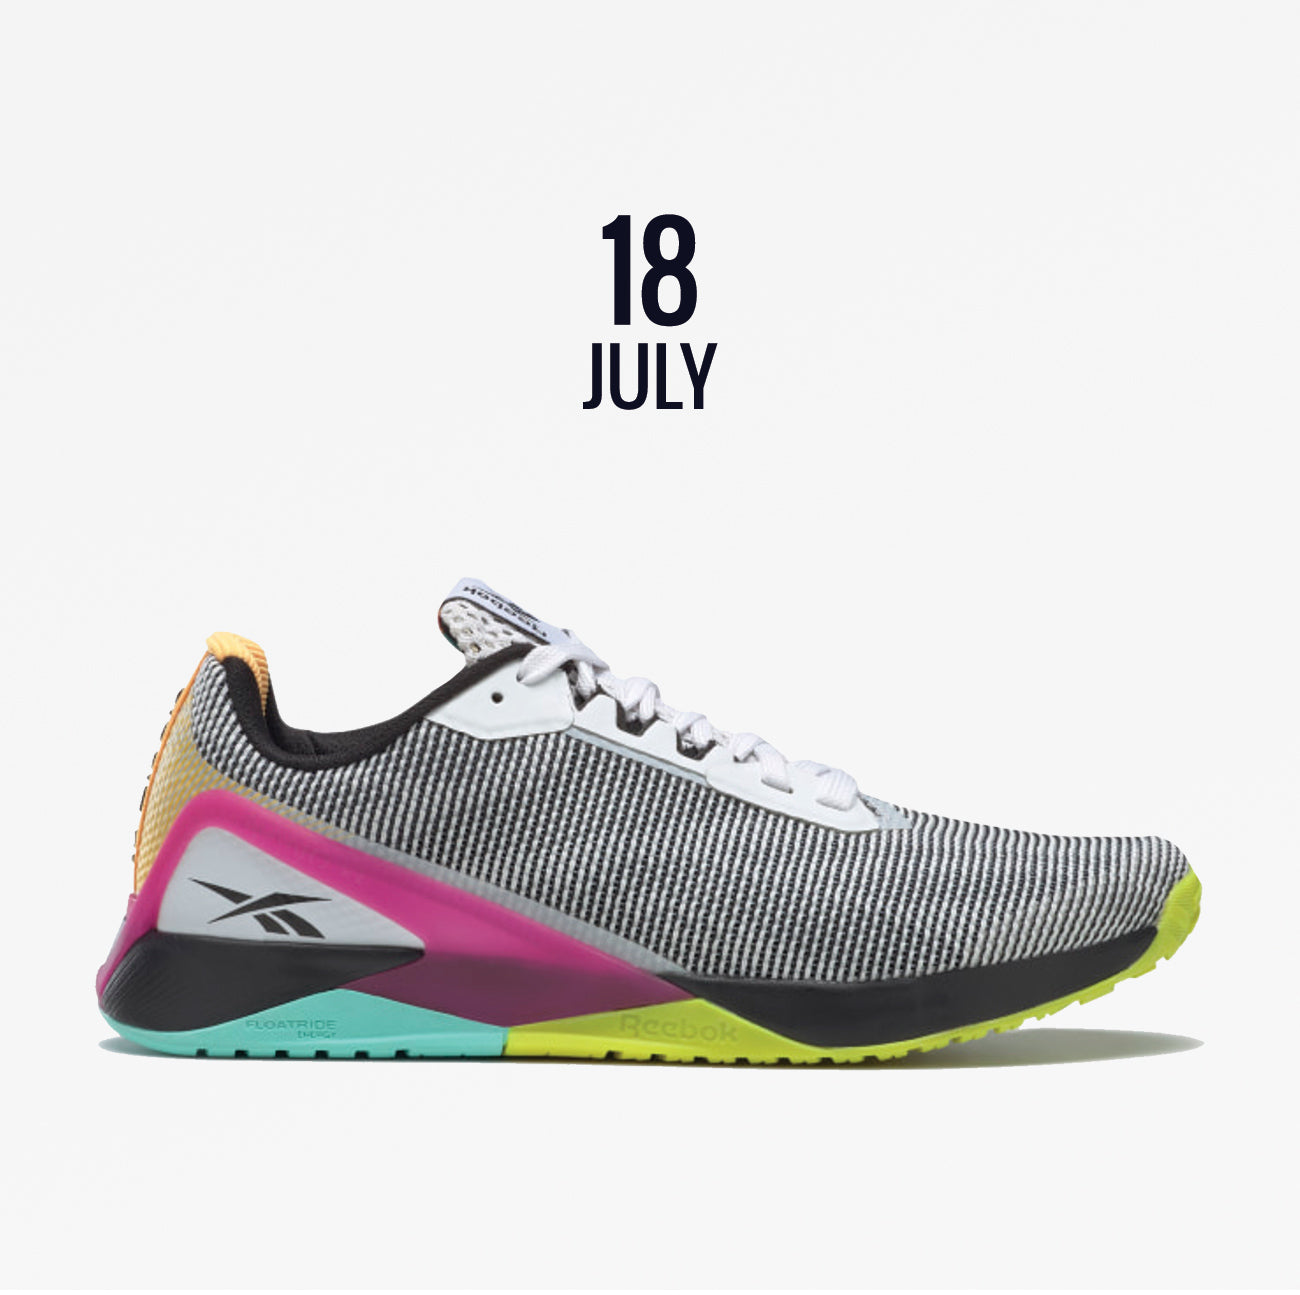 Reebok Nano X1 GRIT - Alive with Color